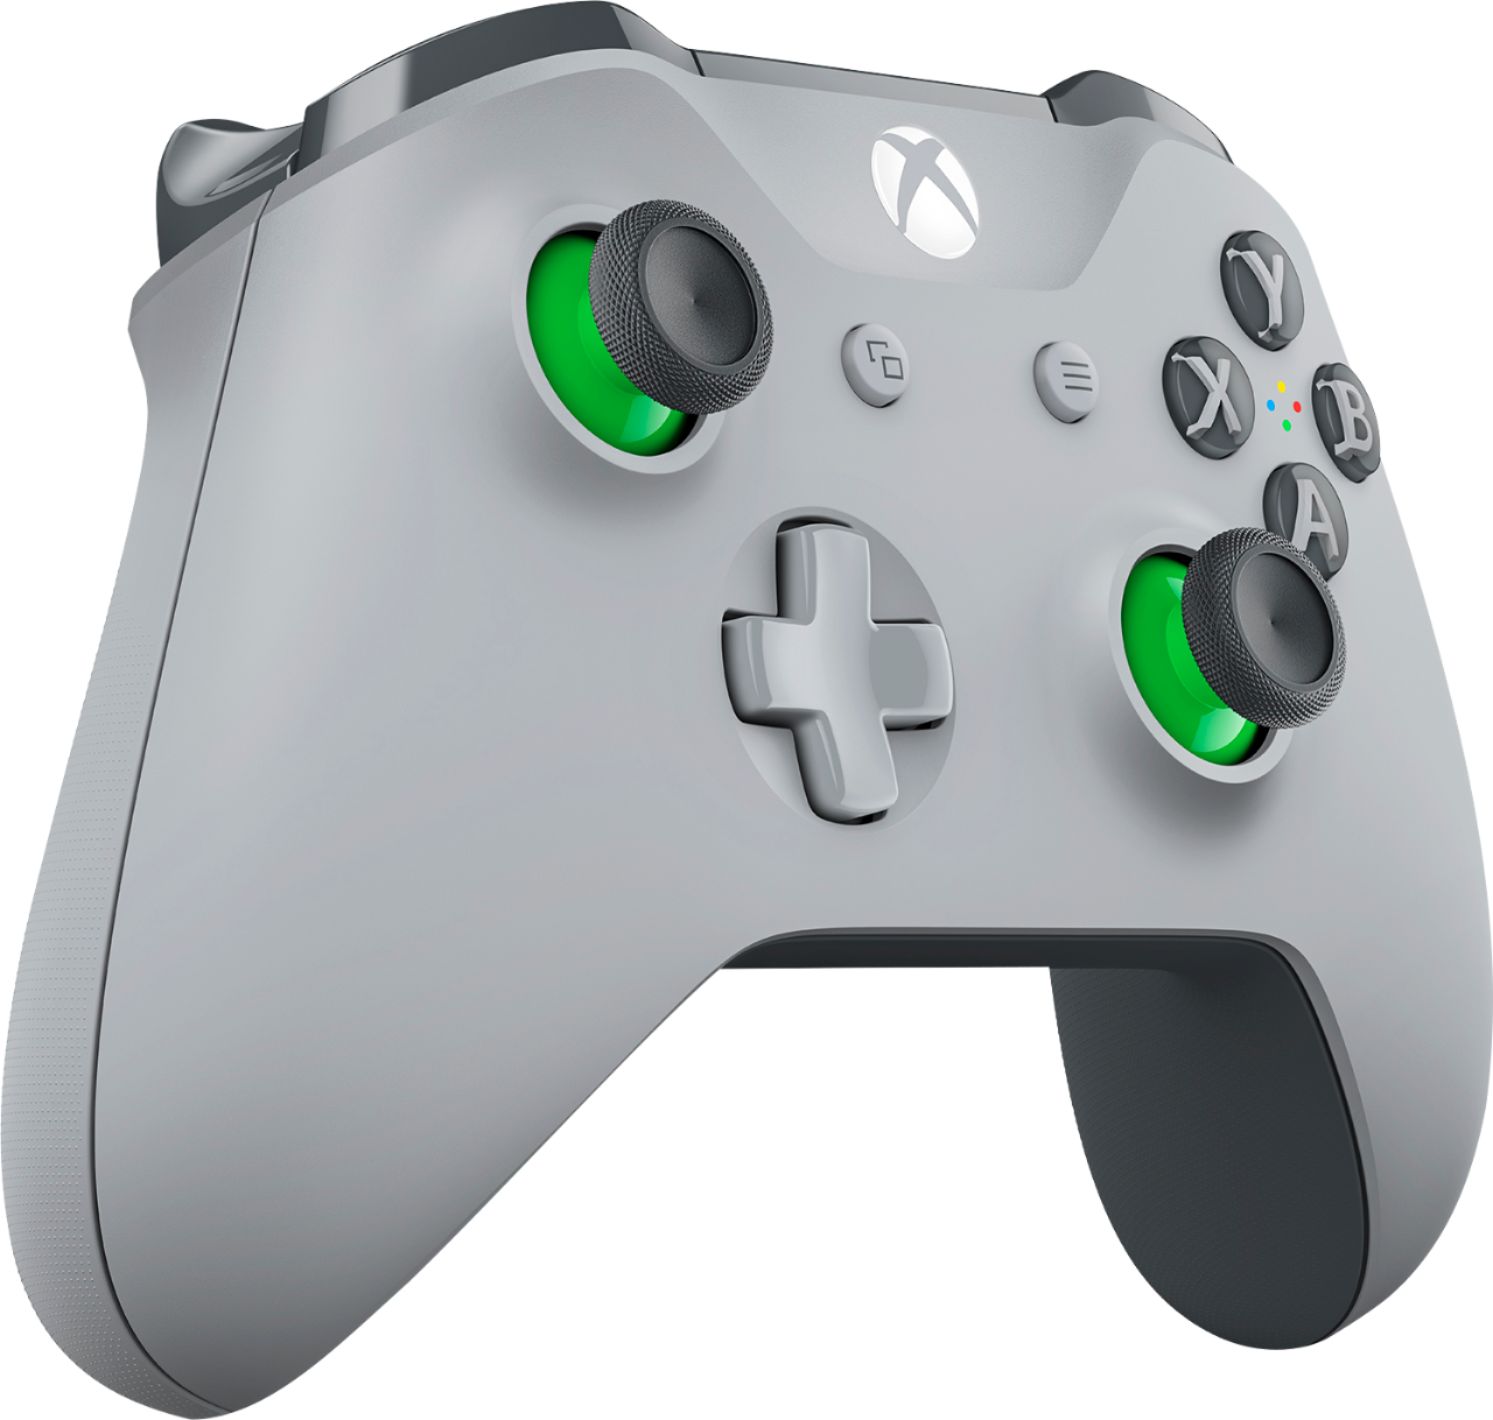 Angle View: Microsoft - Geek Squad Certified Refurbished Wireless Controller for Xbox One and Windows 10 - Gray And Green